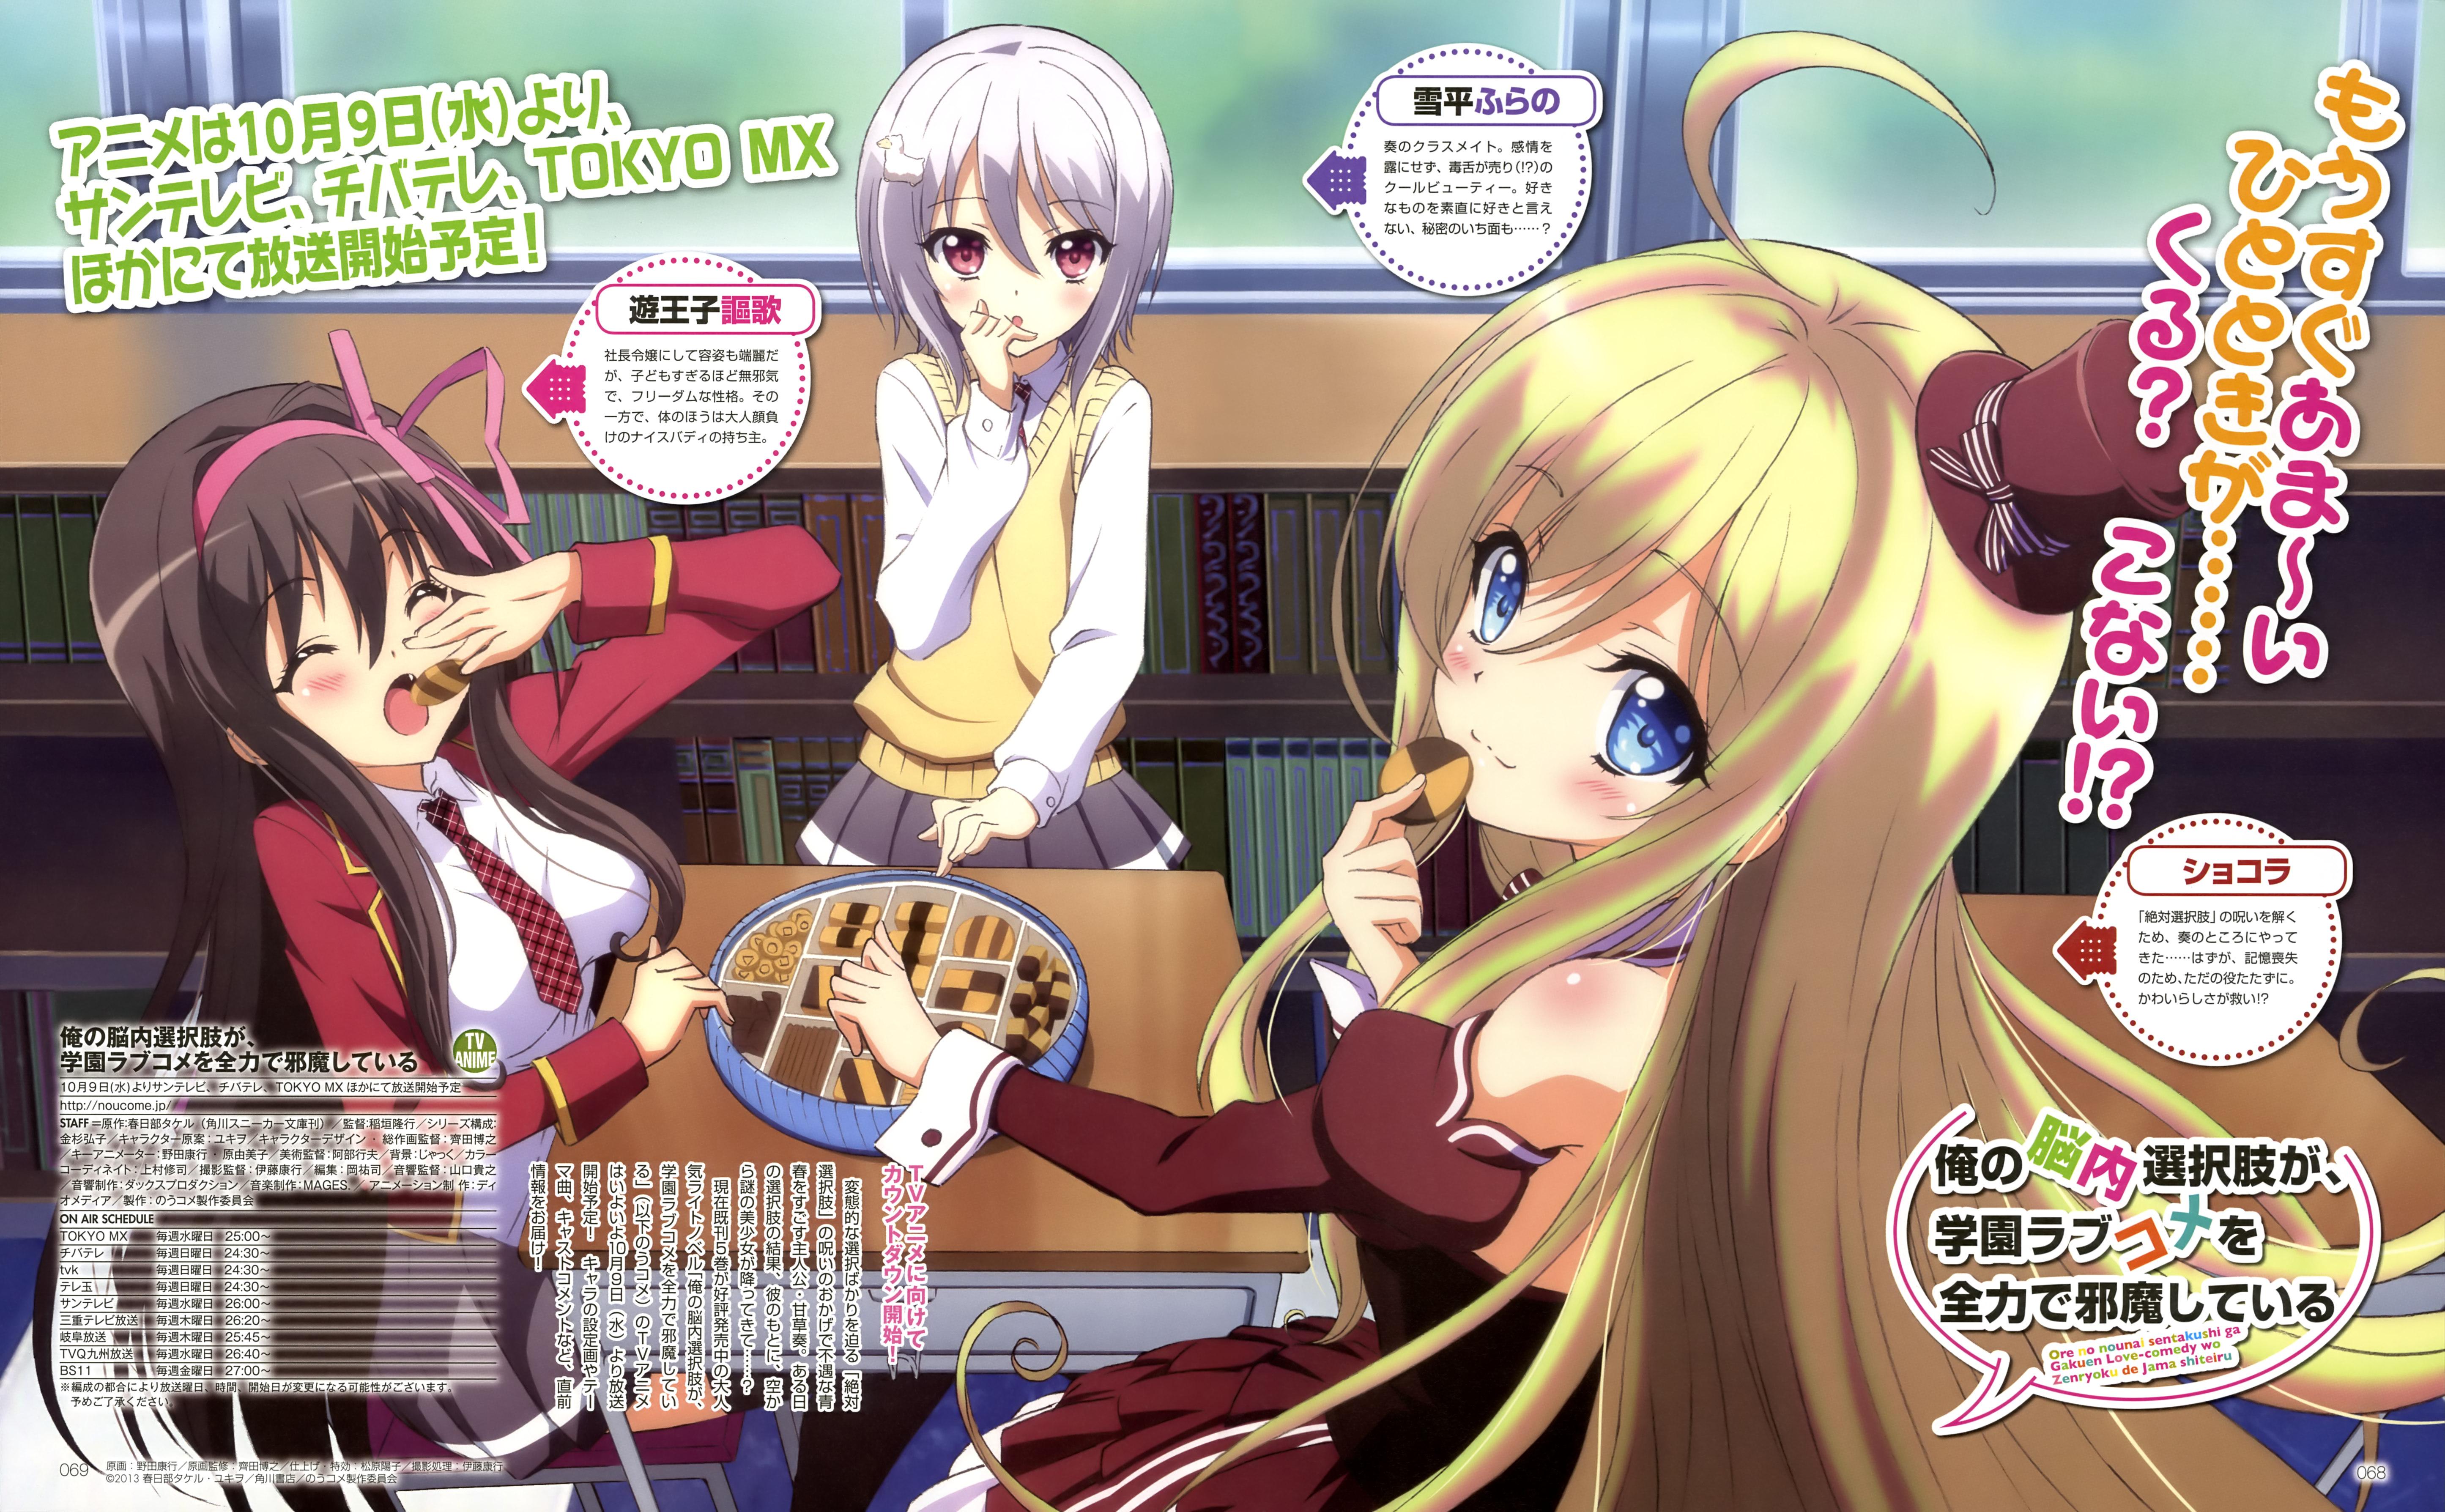 Noucome Wallpapers Wallpaper Cave Images, Photos, Reviews